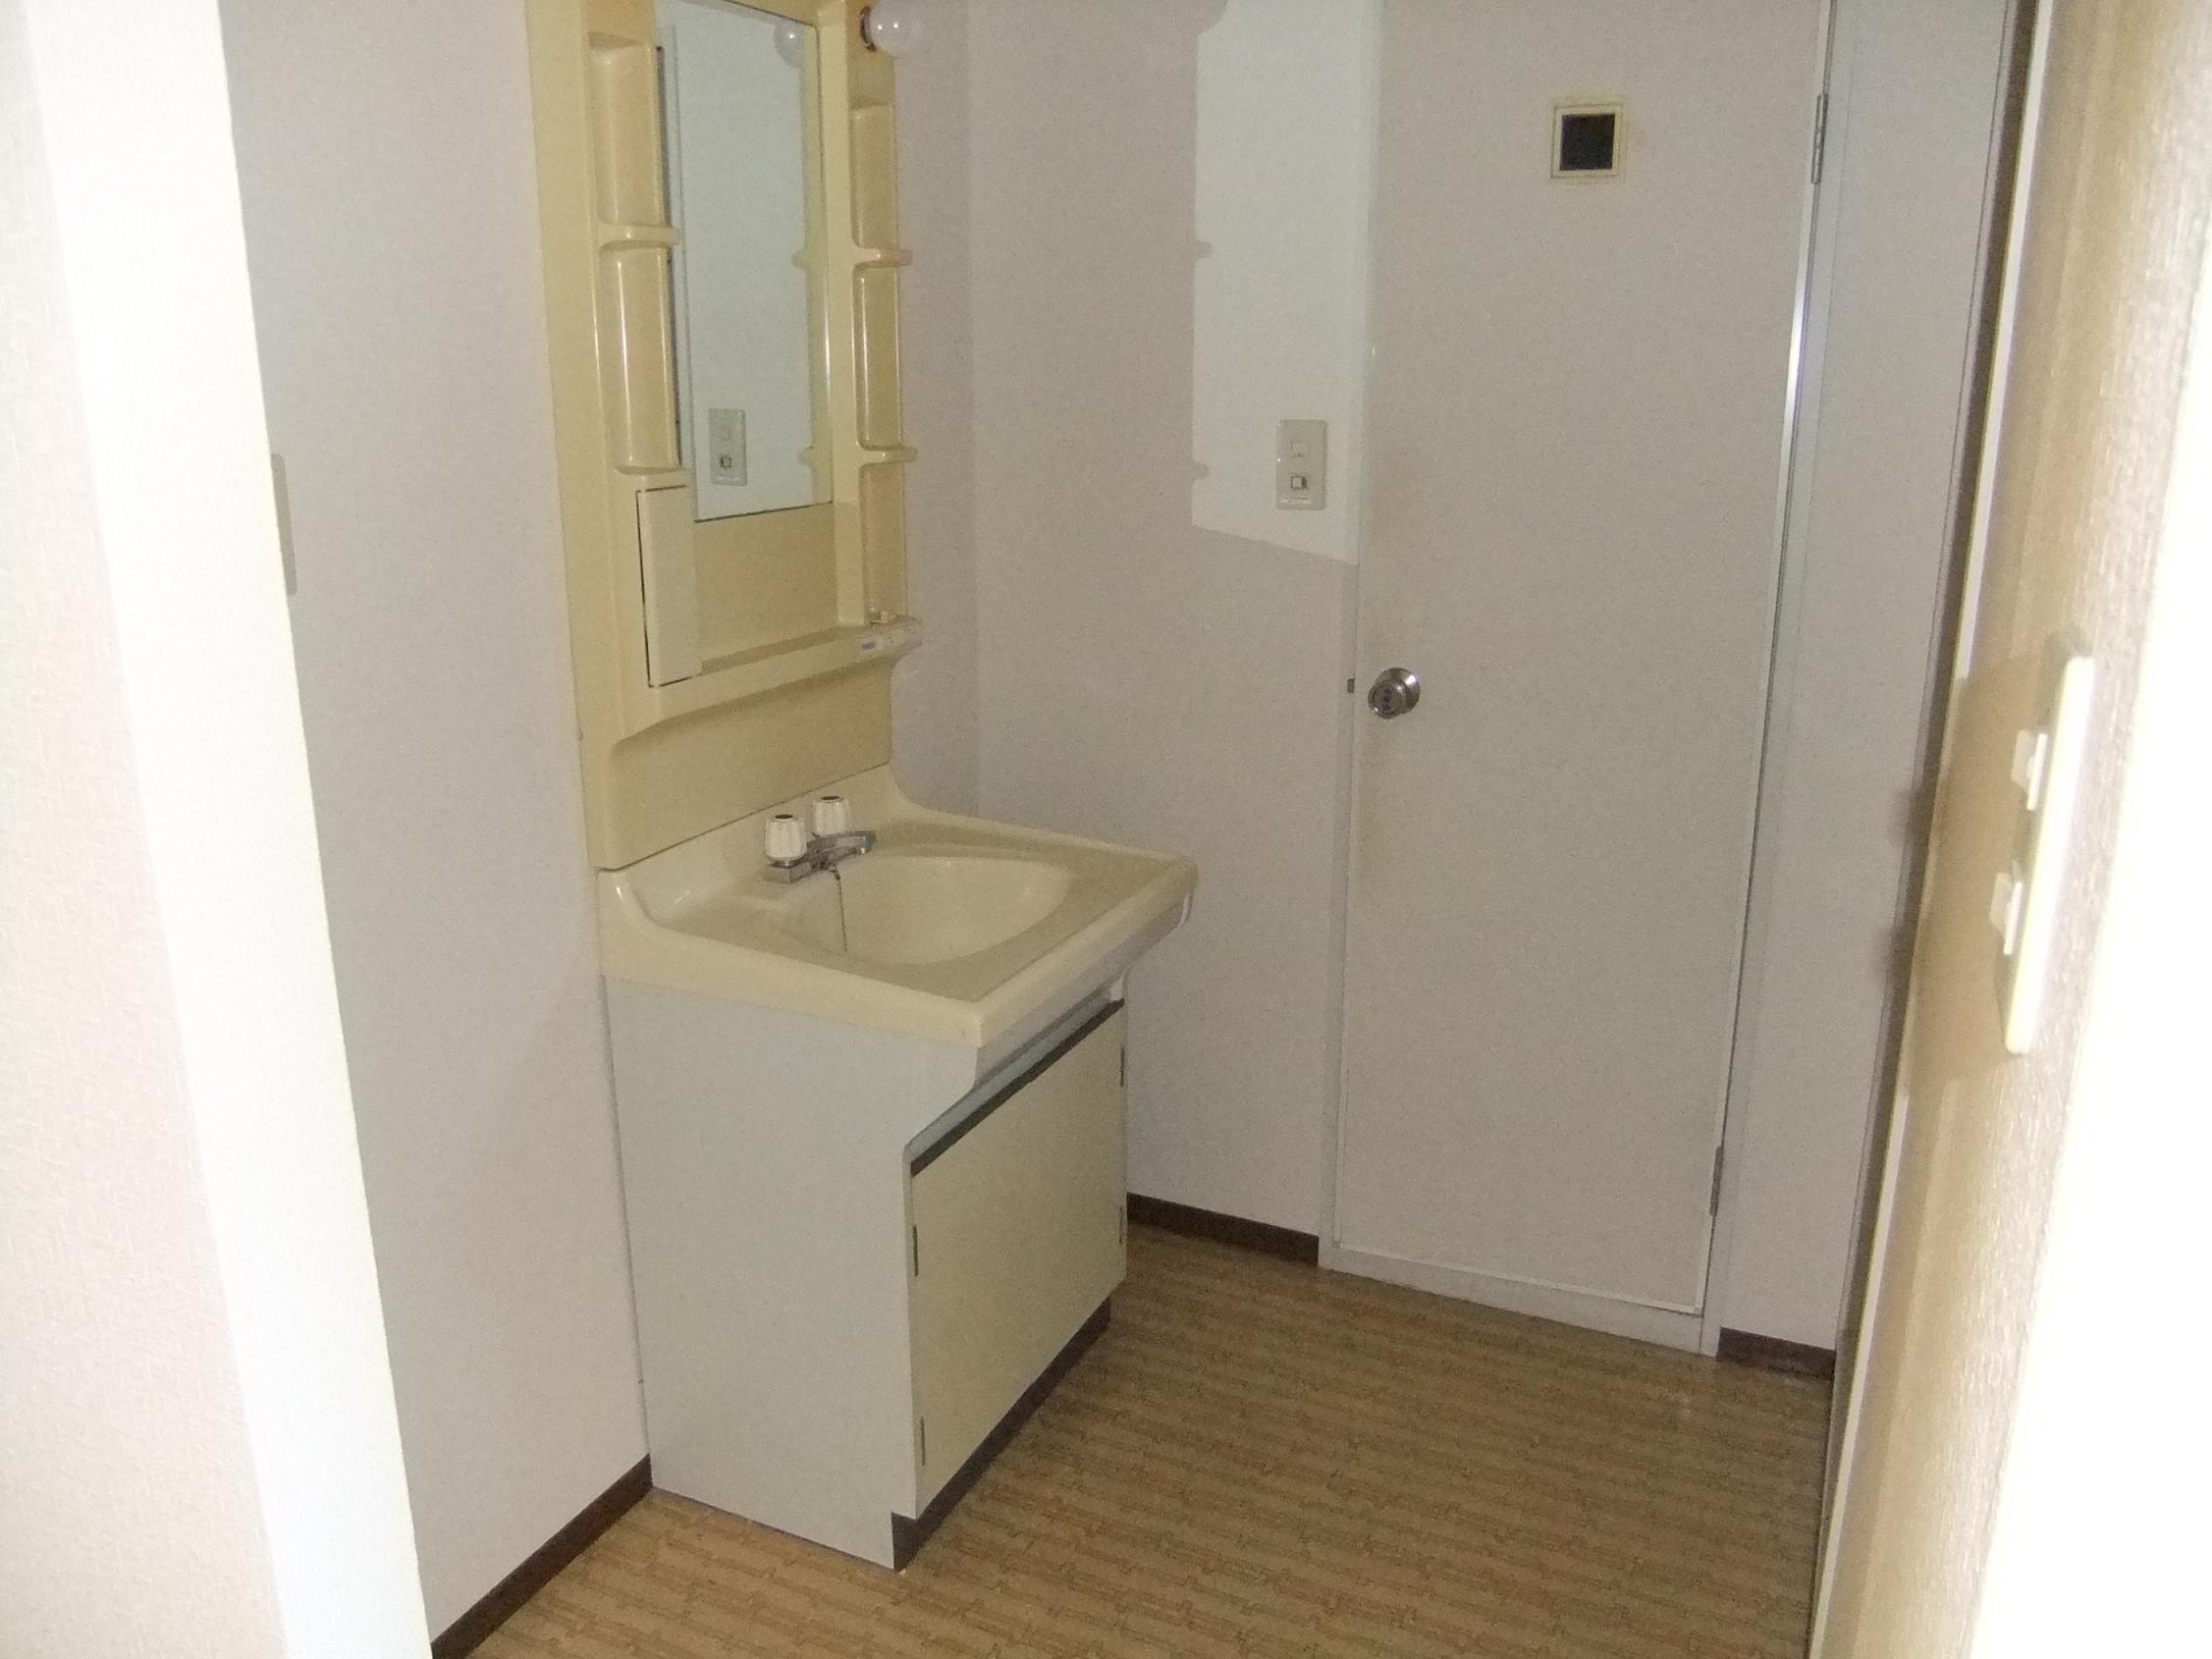 Washroom. Basin of this side is put laundry The back of the door is the toilet